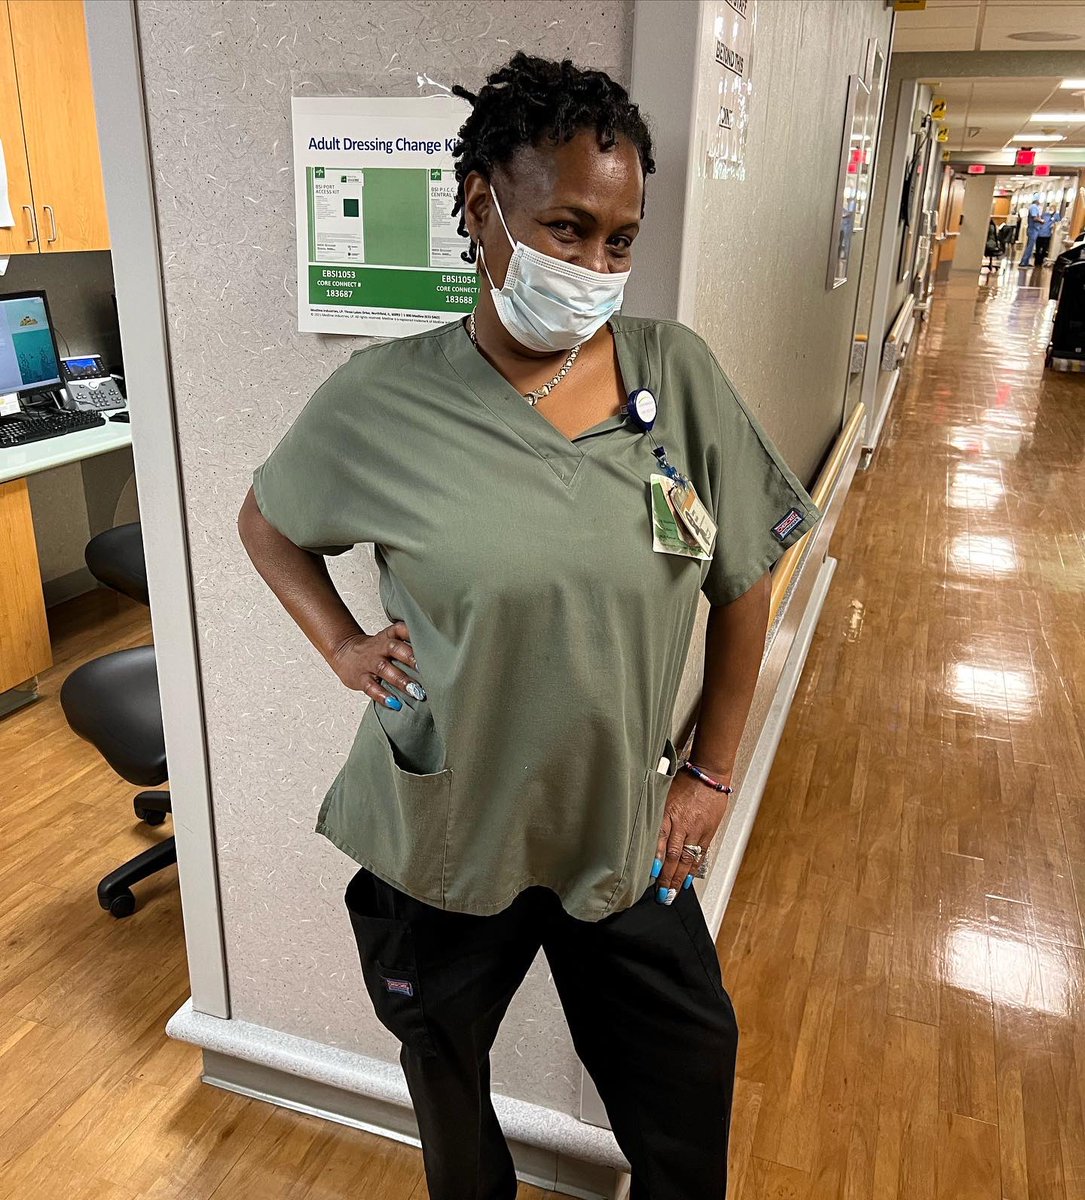 ✨Happy Environmental Services Week!✨ Thank you to all of the totally awesome EVS team members who ensure a safe, clean environment for our patients and colleagues! You are vital members of our healthcare system. Pictured are Roda and Tammy, 2 of our faves!